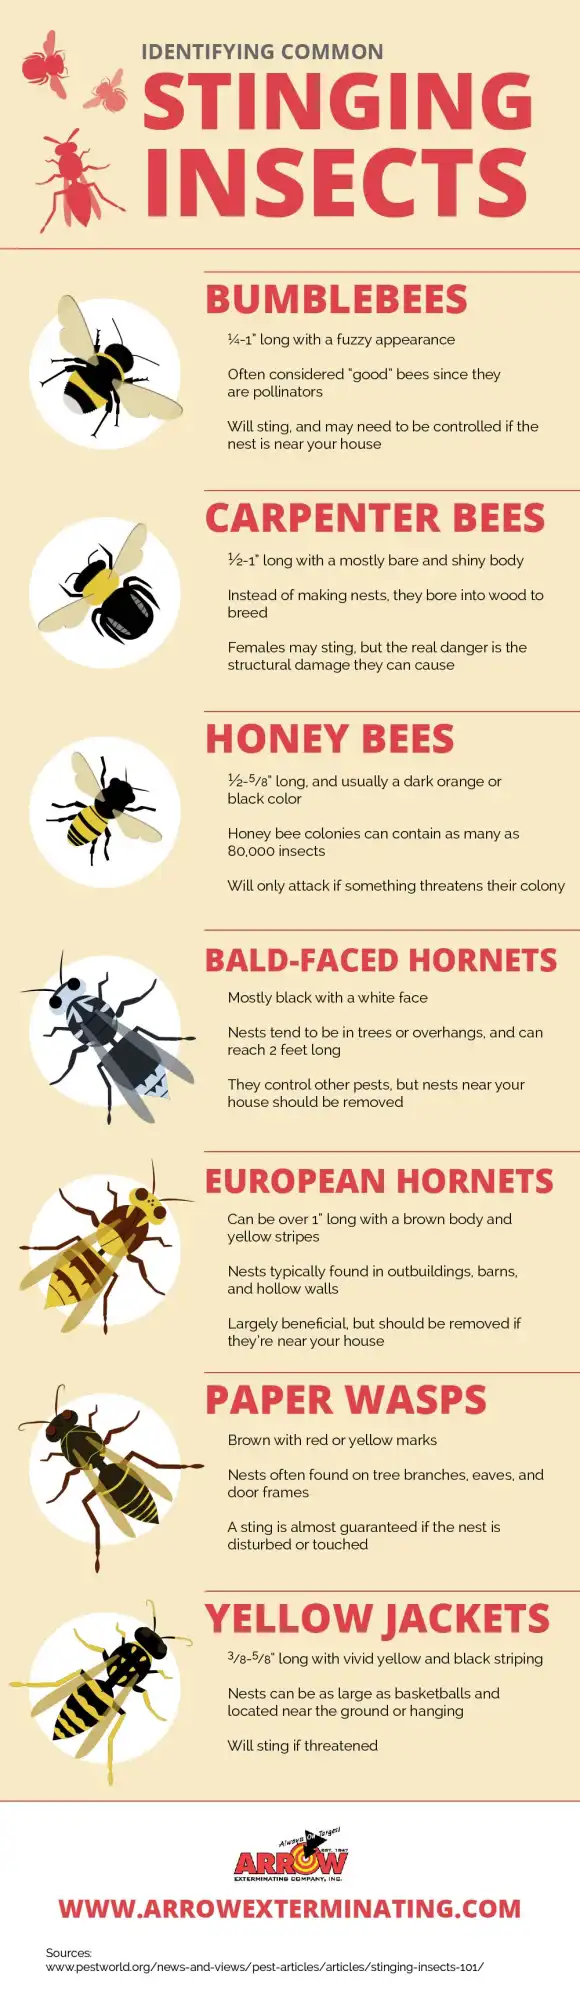 Identifying common stinging insects infographic - keep pests away from your home with Arrow Exterminating Company in NY